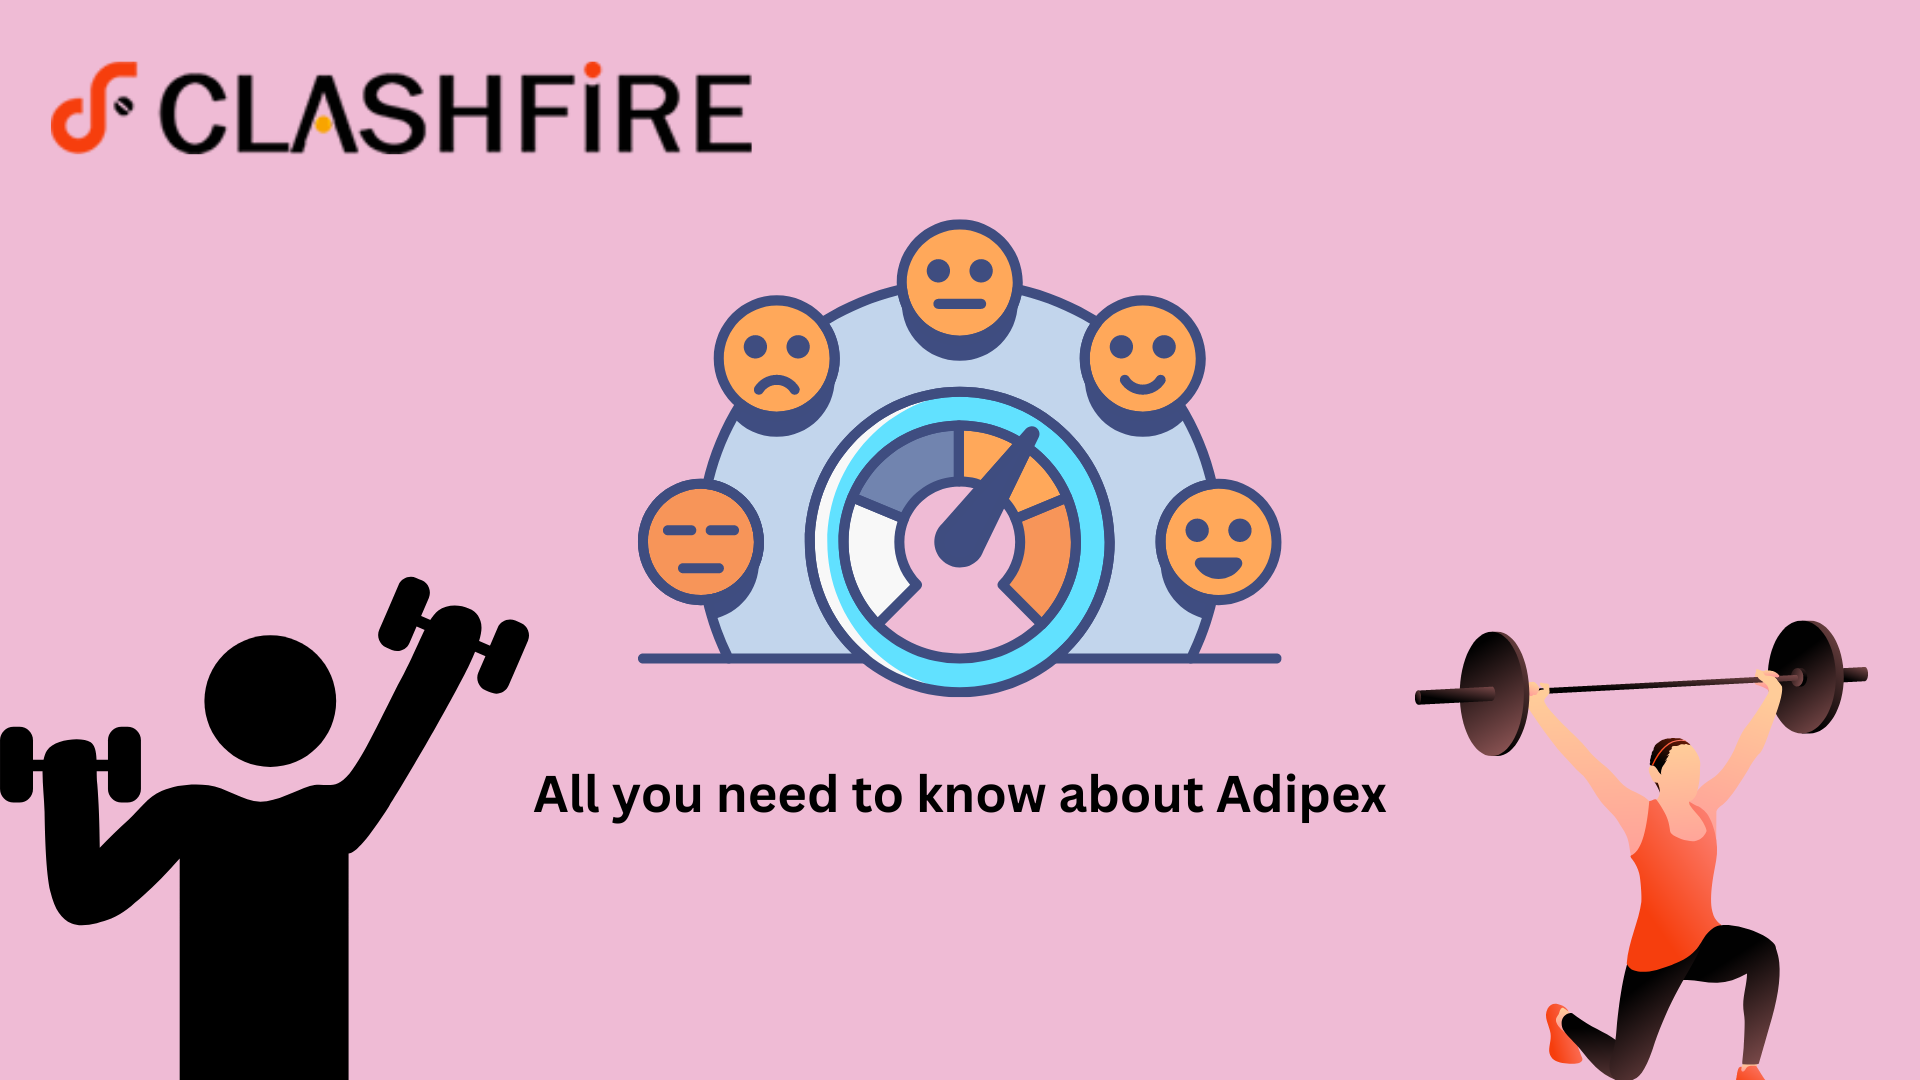 All you need to know about Adipex